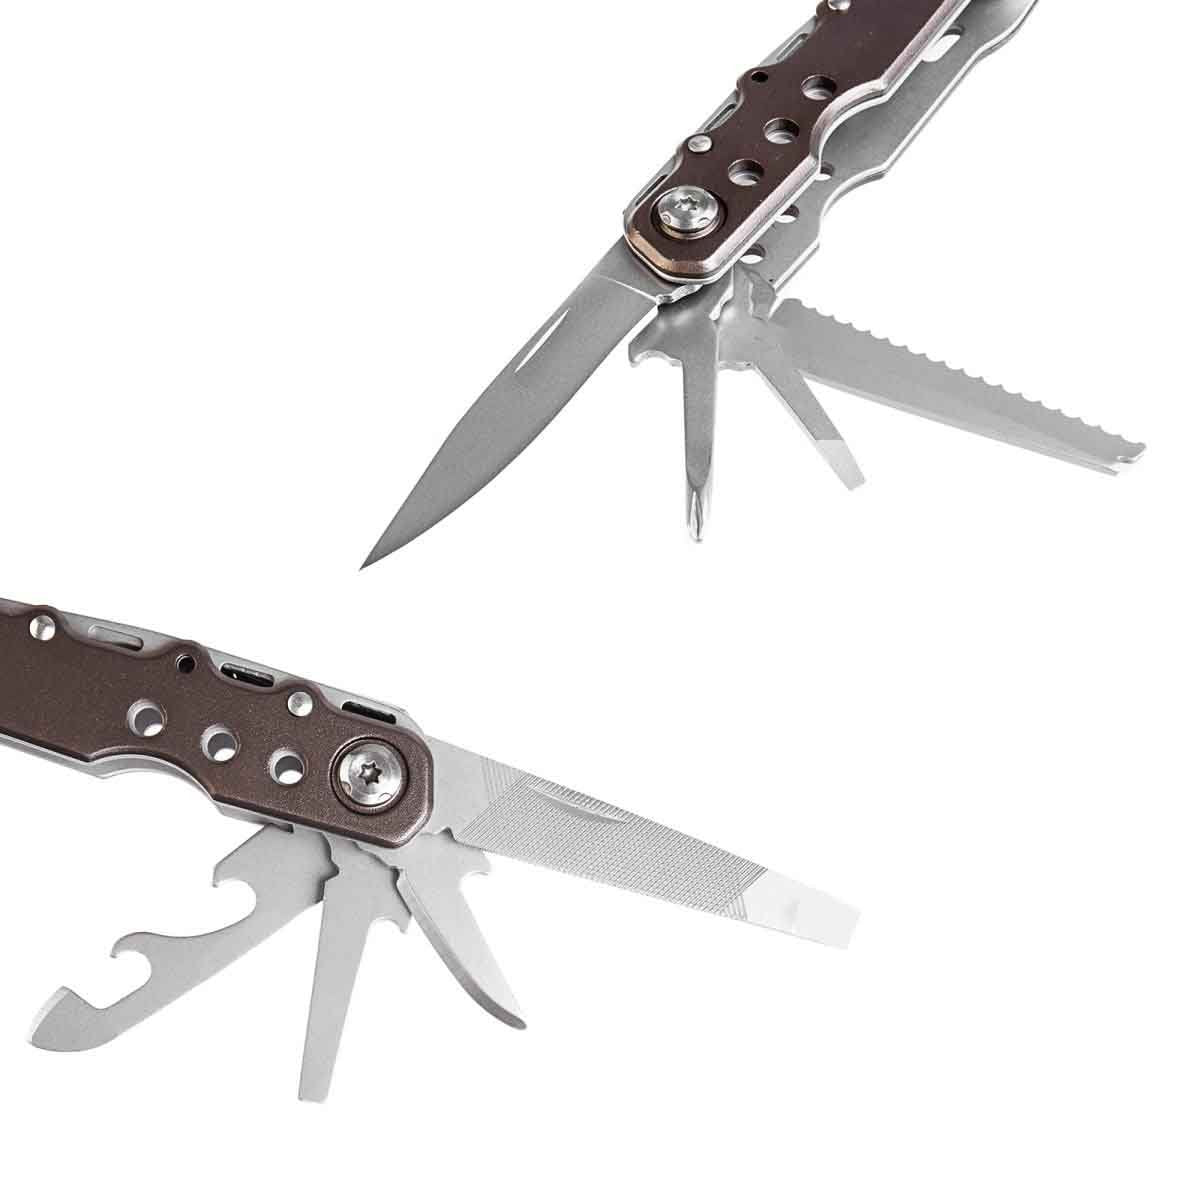 Compact 7-in-1 Pliers Multitool for Home and Outdoor